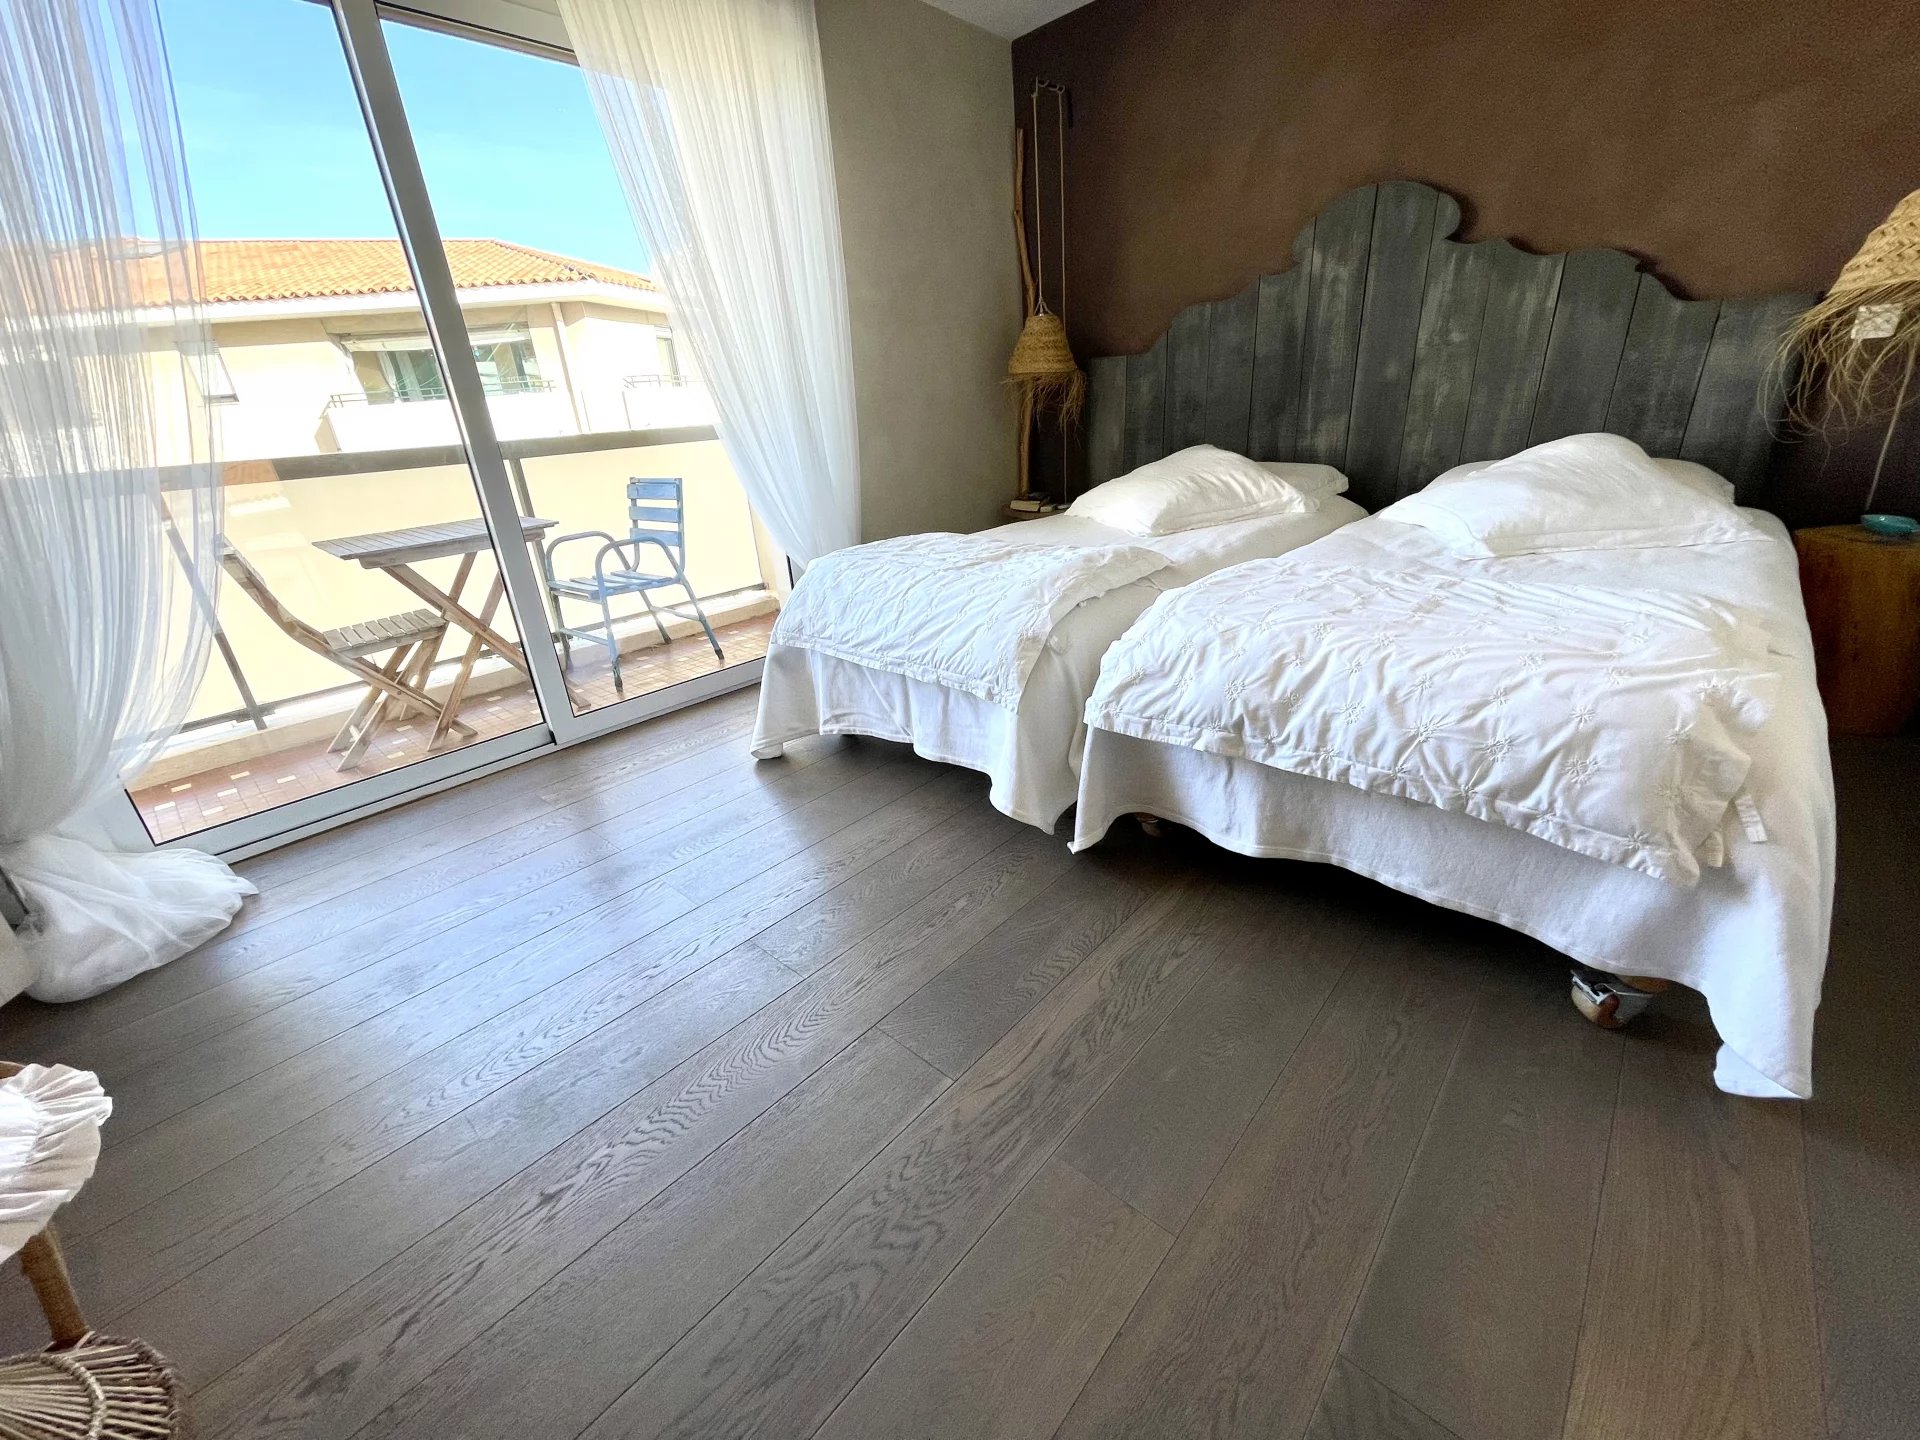 CANNES SALE 3 ROOMS IN CENTER